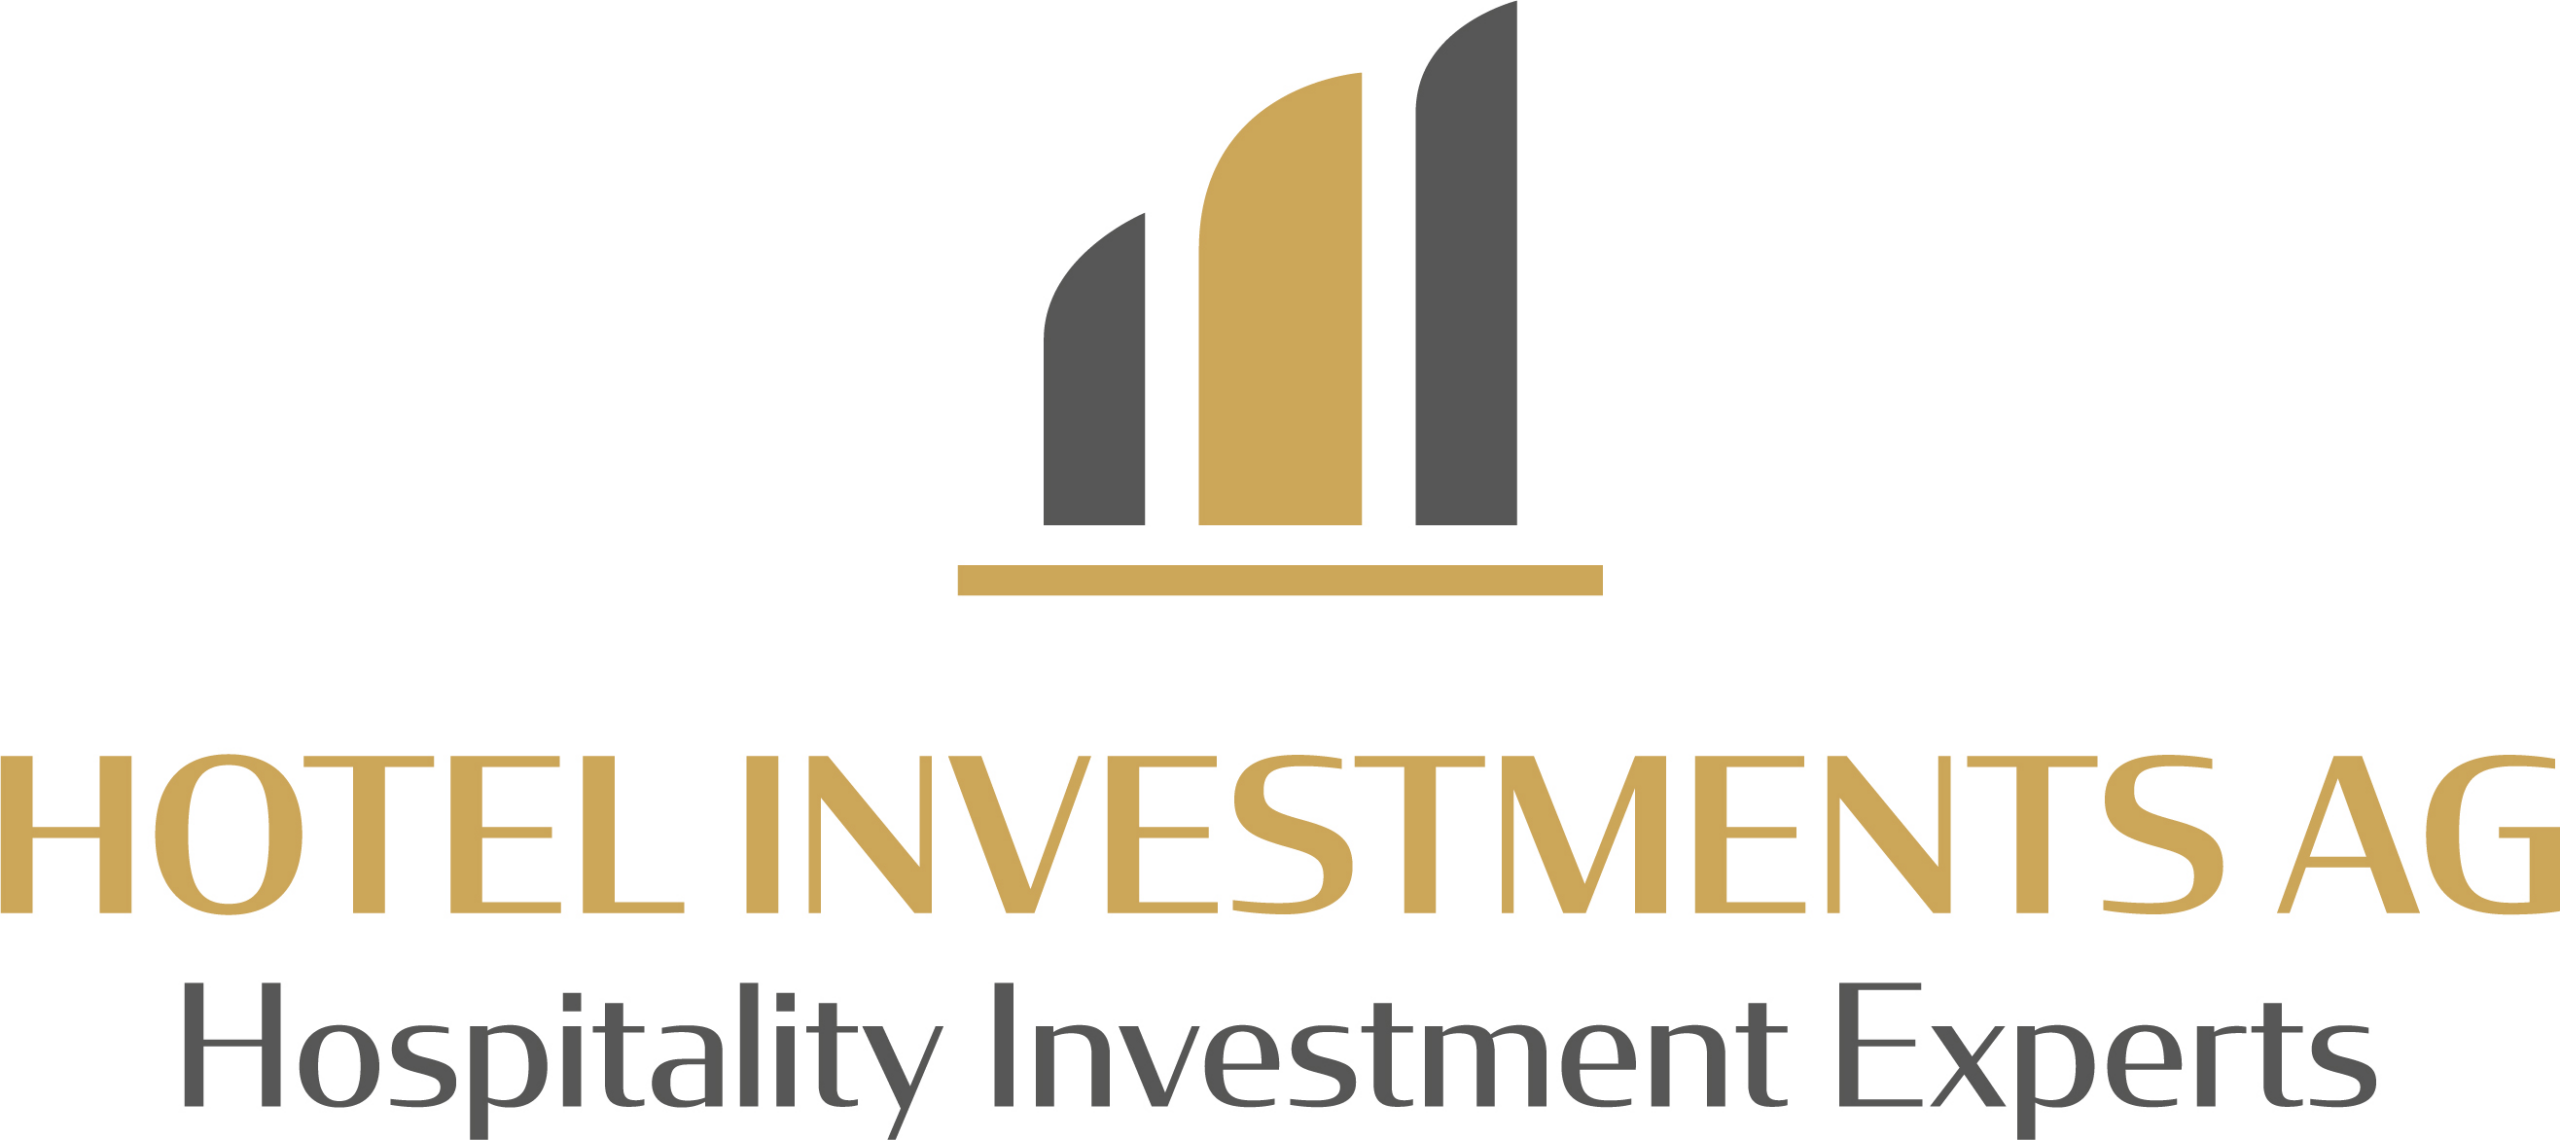 Hospitality Investor Hotel Investments AG